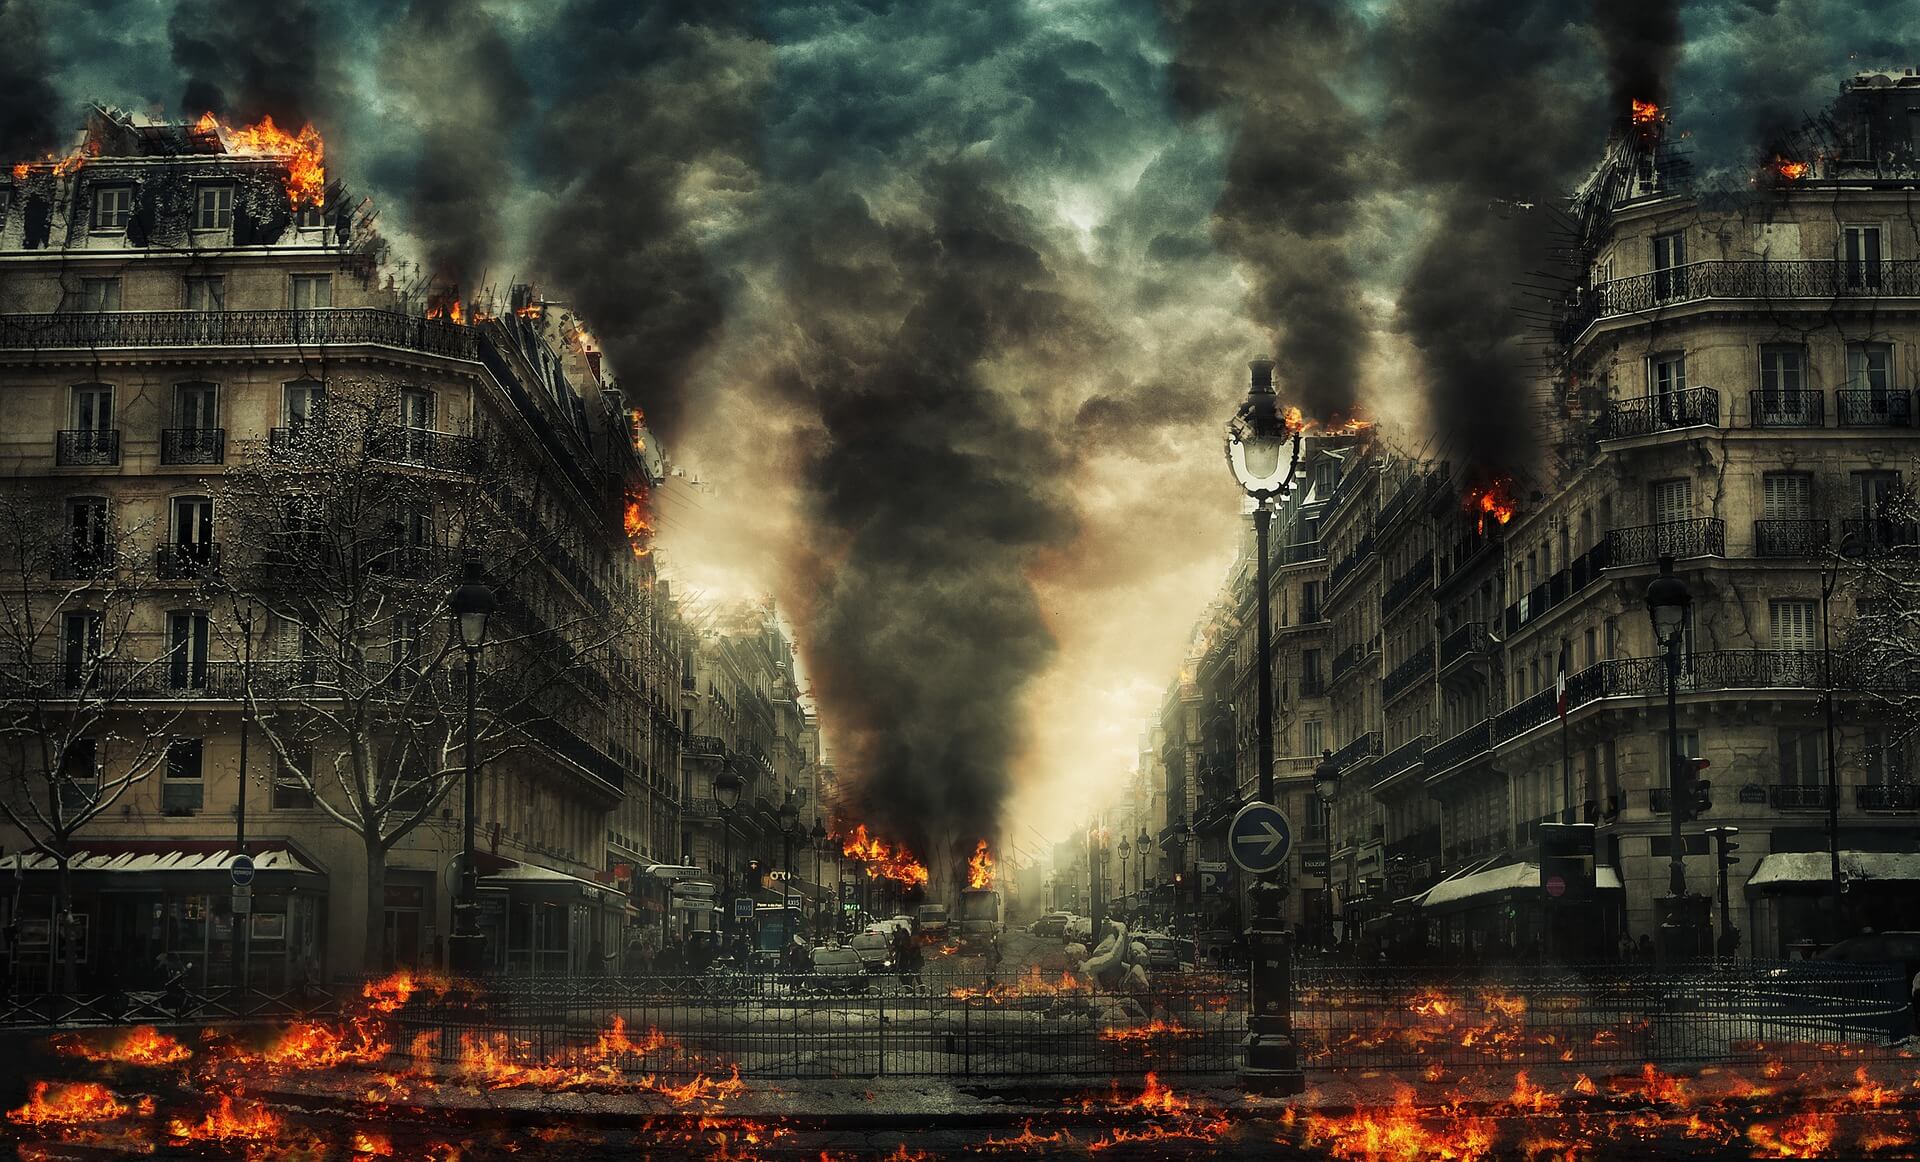 A city totally aflame in apocalyptic imagery